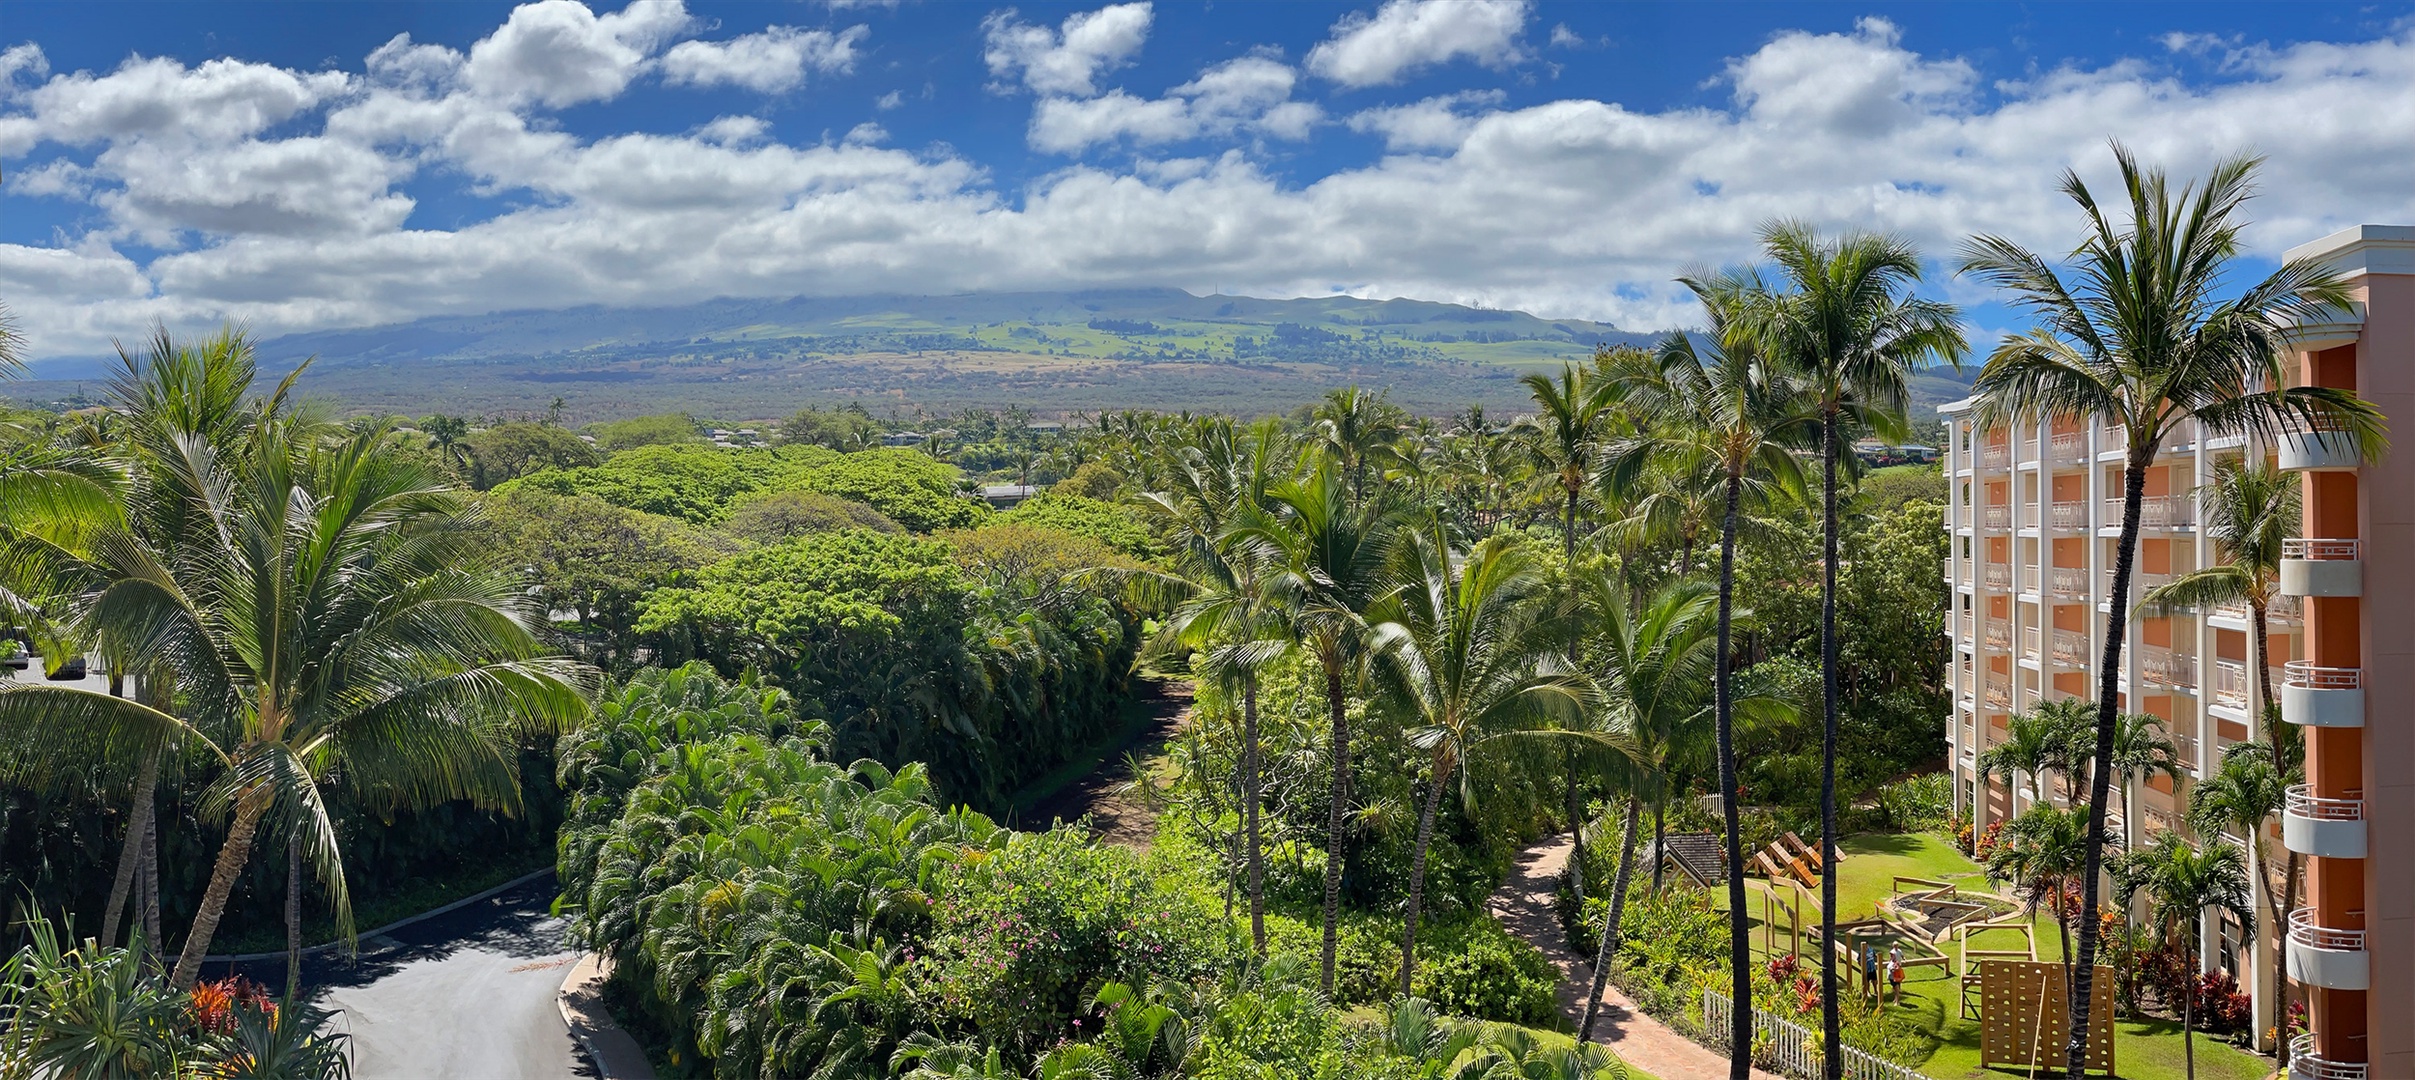 Wailea Vacation Rentals, Blue Ocean Suite H401 at Wailea Beach Villas* - Enjoy Sunrise to Sunset Views from Upcountry and Haleakala Mountain to the Ocean Blue Pacific!